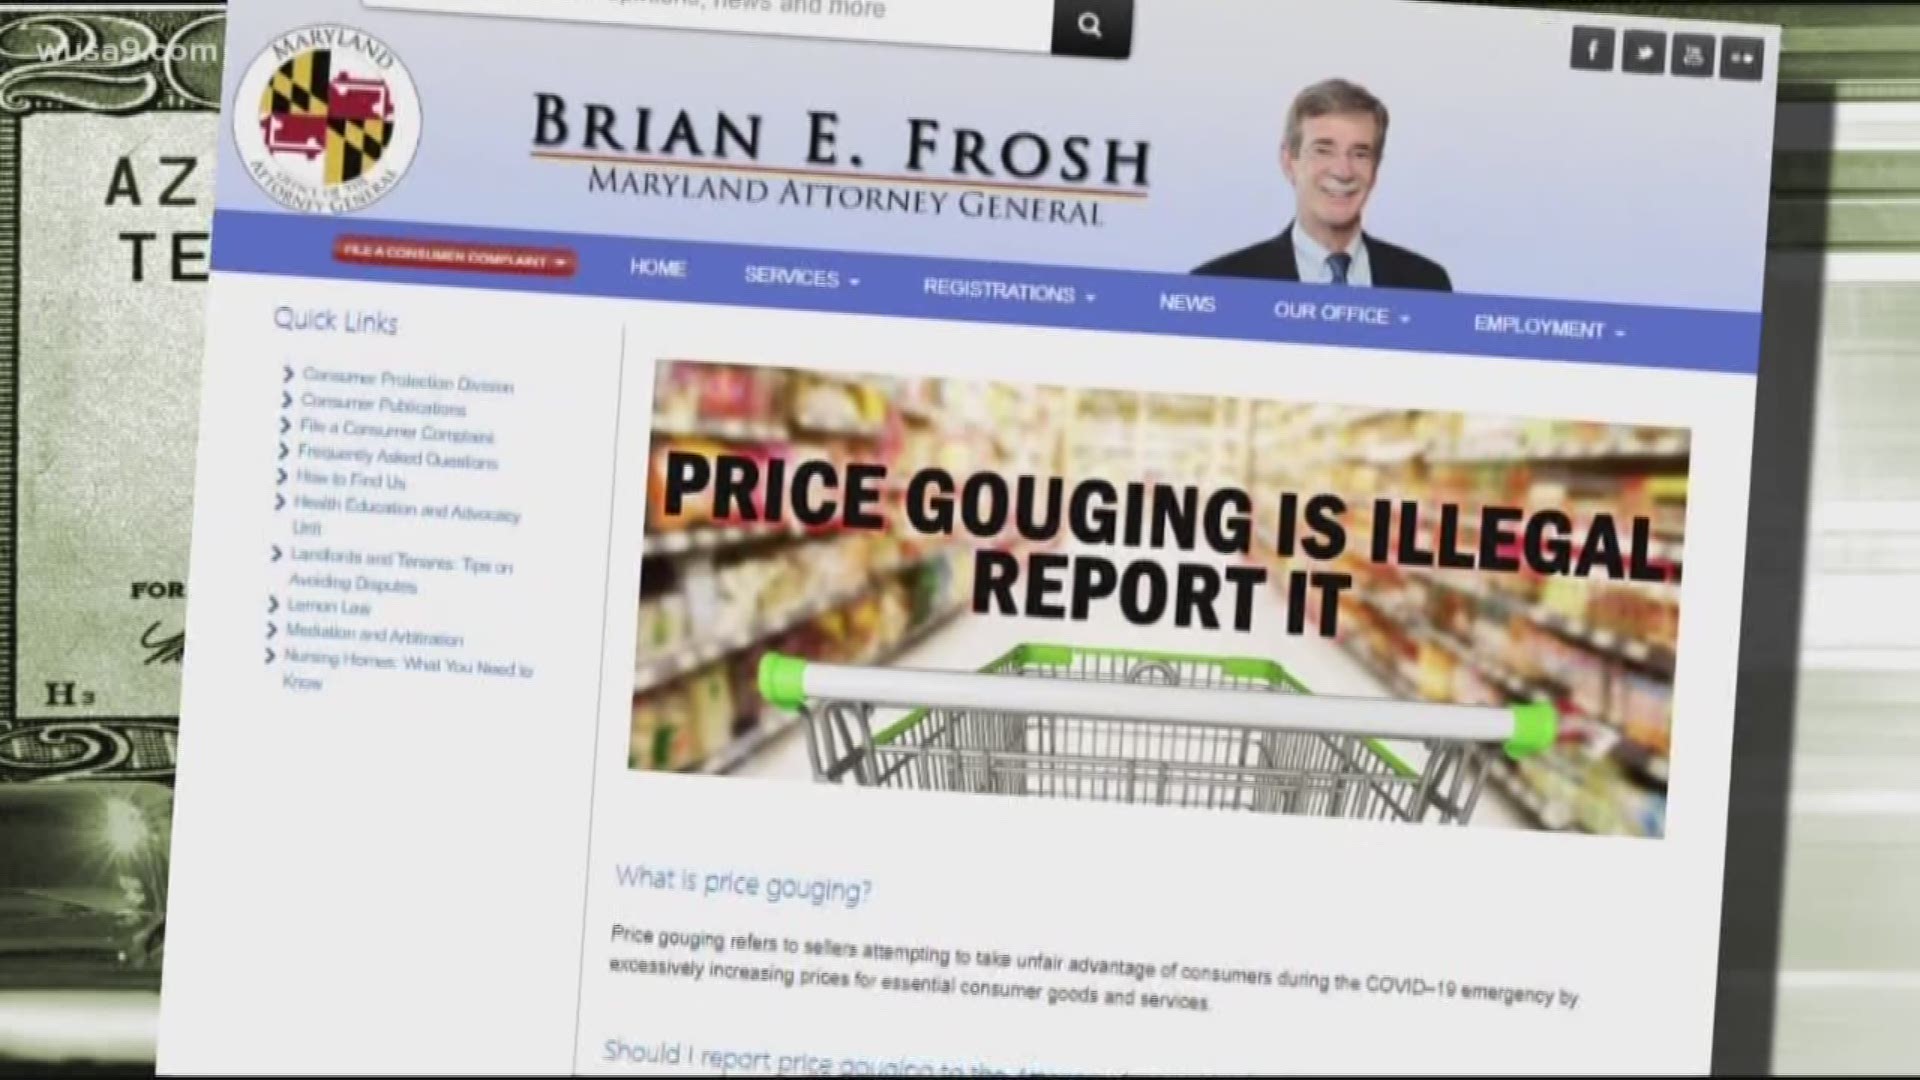 A Maryland-based Facebook group claims to be blowing the whistle on price gouging as authorities urge consumers to report complaints to the MD Attorney General.